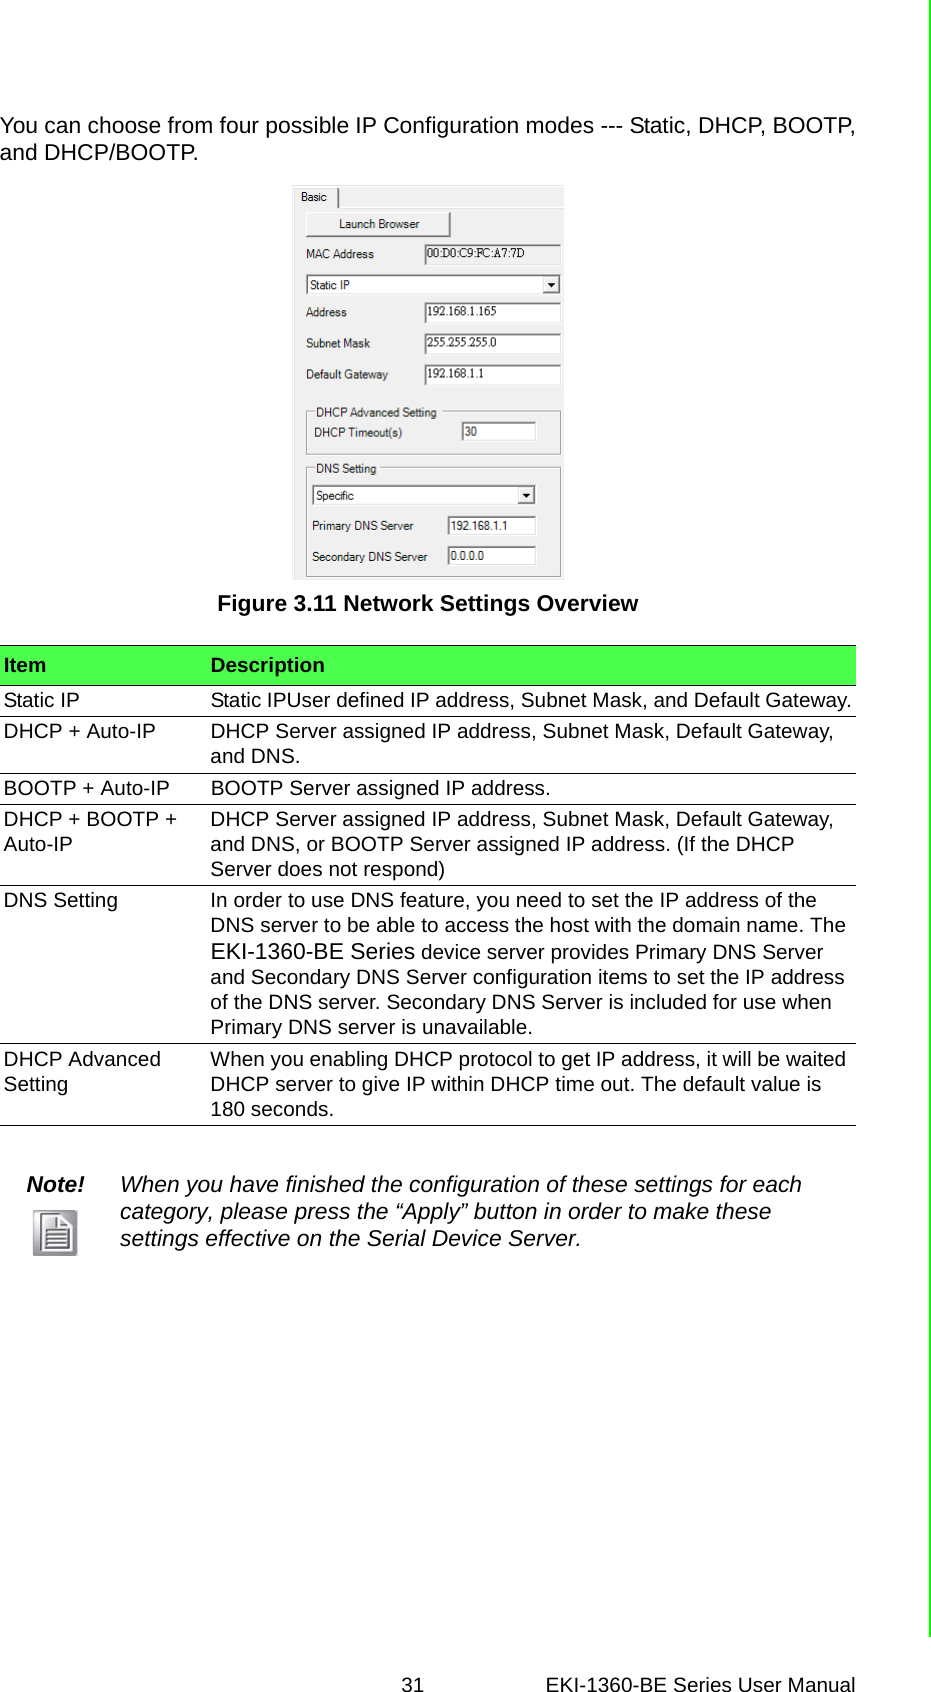 31 EKI-1360-BE Series User Manual You can choose from four possible IP Configuration modes --- Static, DHCP, BOOTP,and DHCP/BOOTP.Figure 3.11 Network Settings OverviewItem DescriptionStatic IP Static IPUser defined IP address, Subnet Mask, and Default Gateway.DHCP + Auto-IP DHCP Server assigned IP address, Subnet Mask, Default Gateway, and DNS.BOOTP + Auto-IP BOOTP Server assigned IP address.DHCP + BOOTP + Auto-IP DHCP Server assigned IP address, Subnet Mask, Default Gateway, and DNS, or BOOTP Server assigned IP address. (If the DHCP Server does not respond)DNS Setting In order to use DNS feature, you need to set the IP address of the DNS server to be able to access the host with the domain name. The EKI-1360-BE Series device server provides Primary DNS Server and Secondary DNS Server configuration items to set the IP address of the DNS server. Secondary DNS Server is included for use when Primary DNS server is unavailable.DHCP Advanced Setting When you enabling DHCP protocol to get IP address, it will be waited DHCP server to give IP within DHCP time out. The default value is 180 seconds.Note! When you have finished the configuration of these settings for each category, please press the “Apply” button in order to make these settings effective on the Serial Device Server.